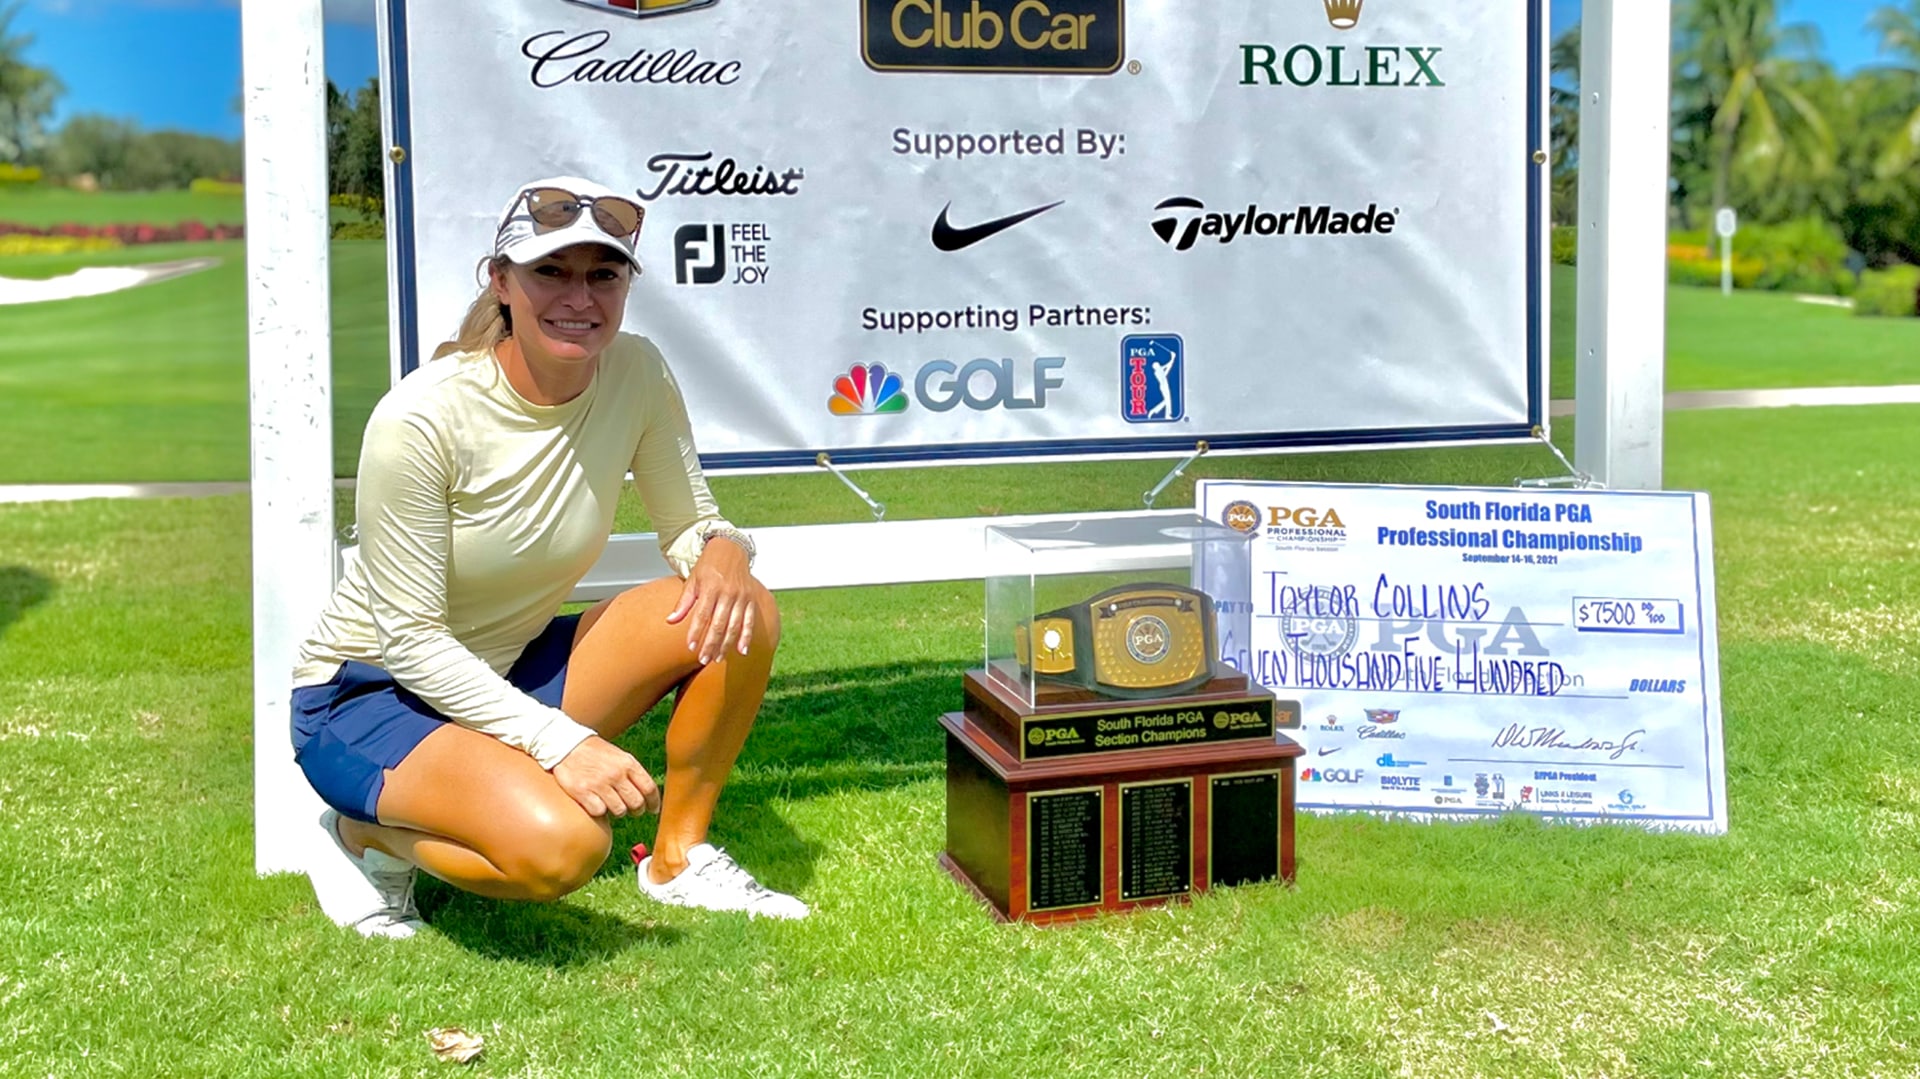 Meet the teaching pro with a great story who’s teeing it up on the LPGA this week